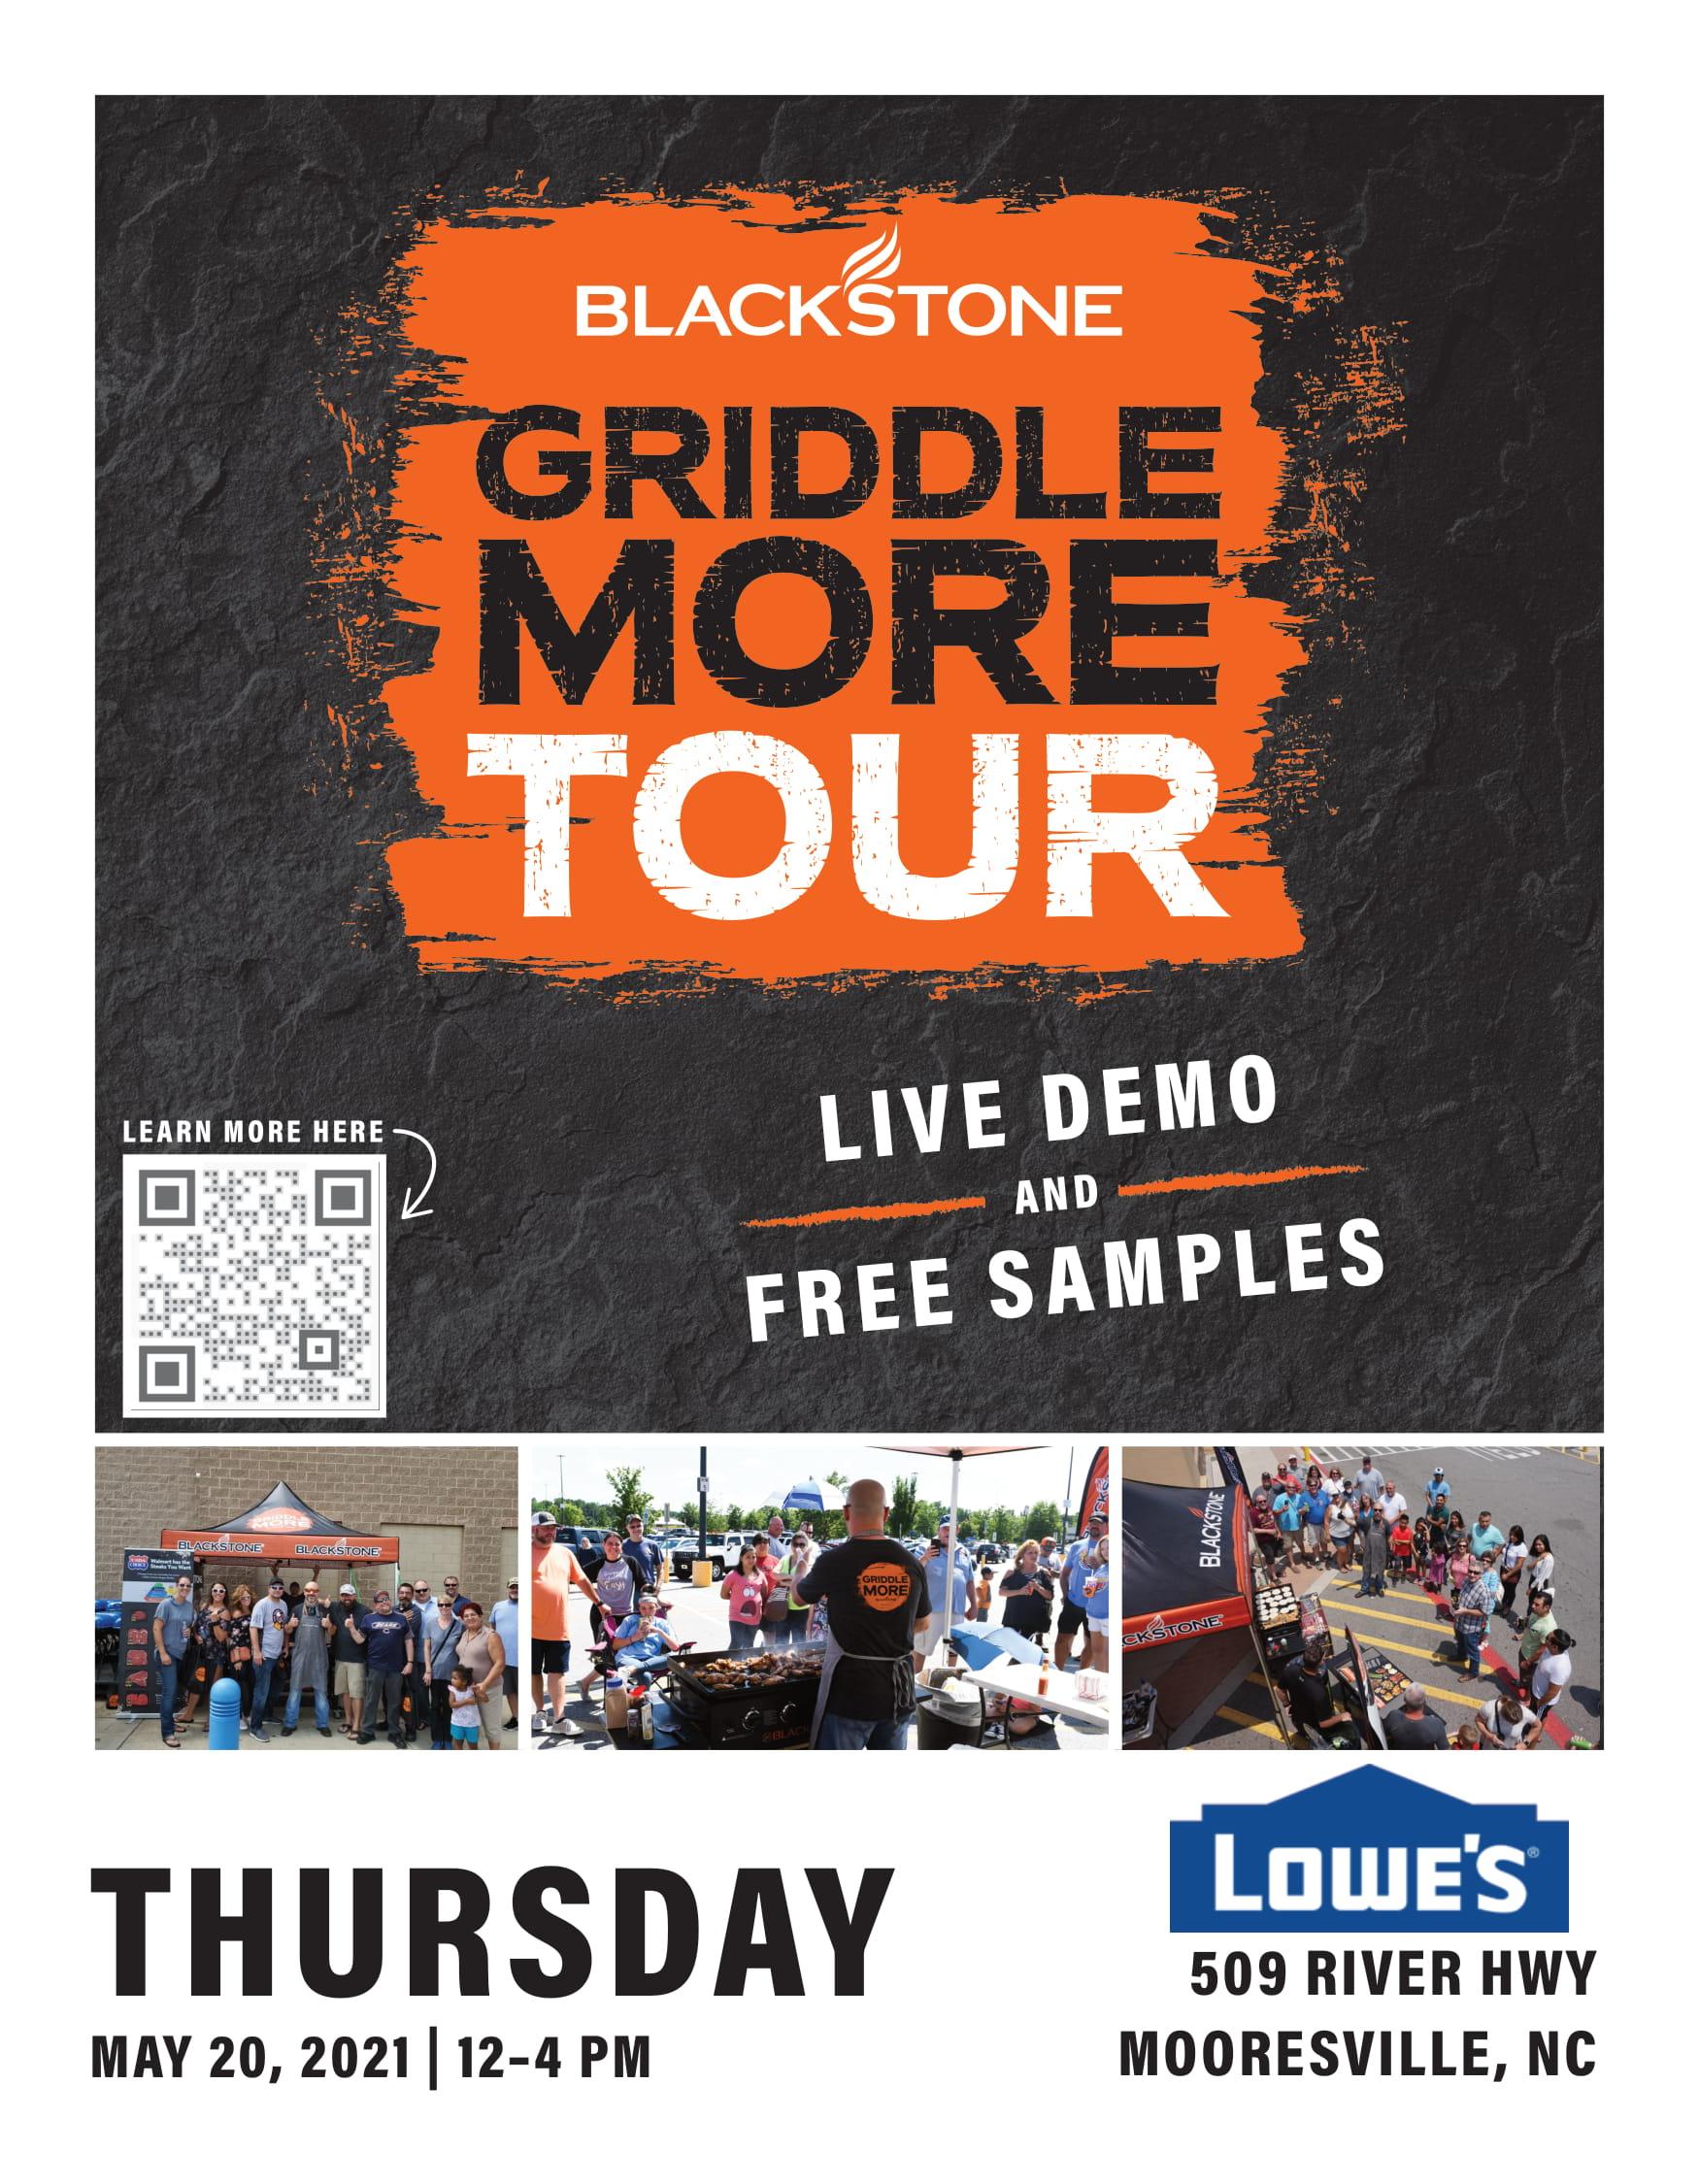 Blackstone Griddle More Tour (unlimited attendees RSVP for a free hat